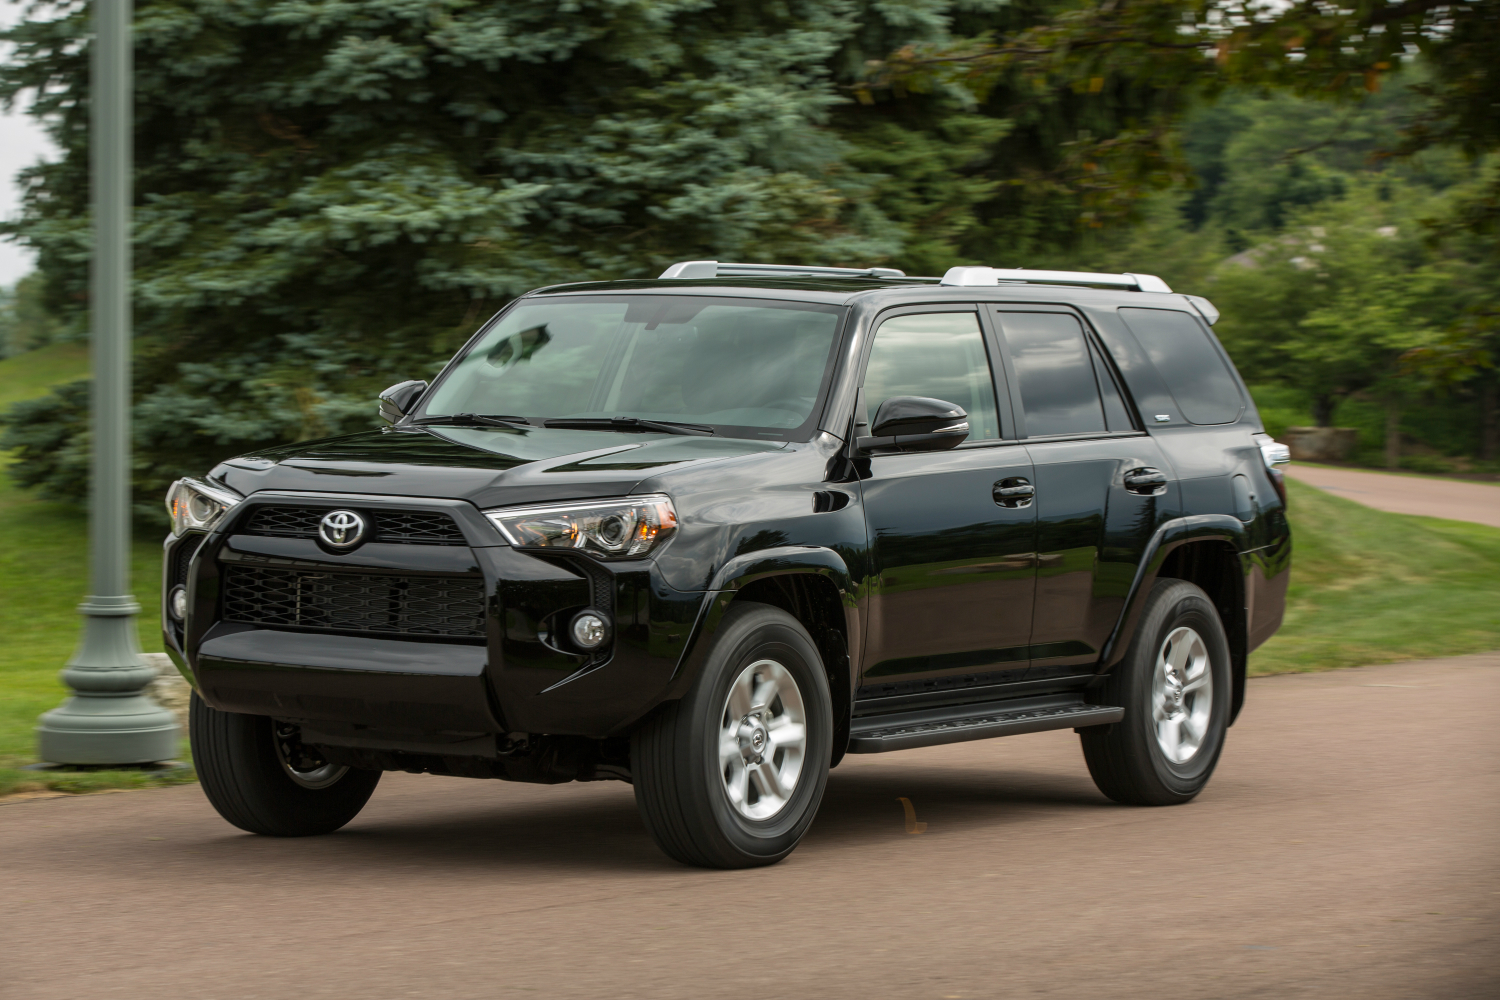 2018 toyota 4runner specs release date price performance 08